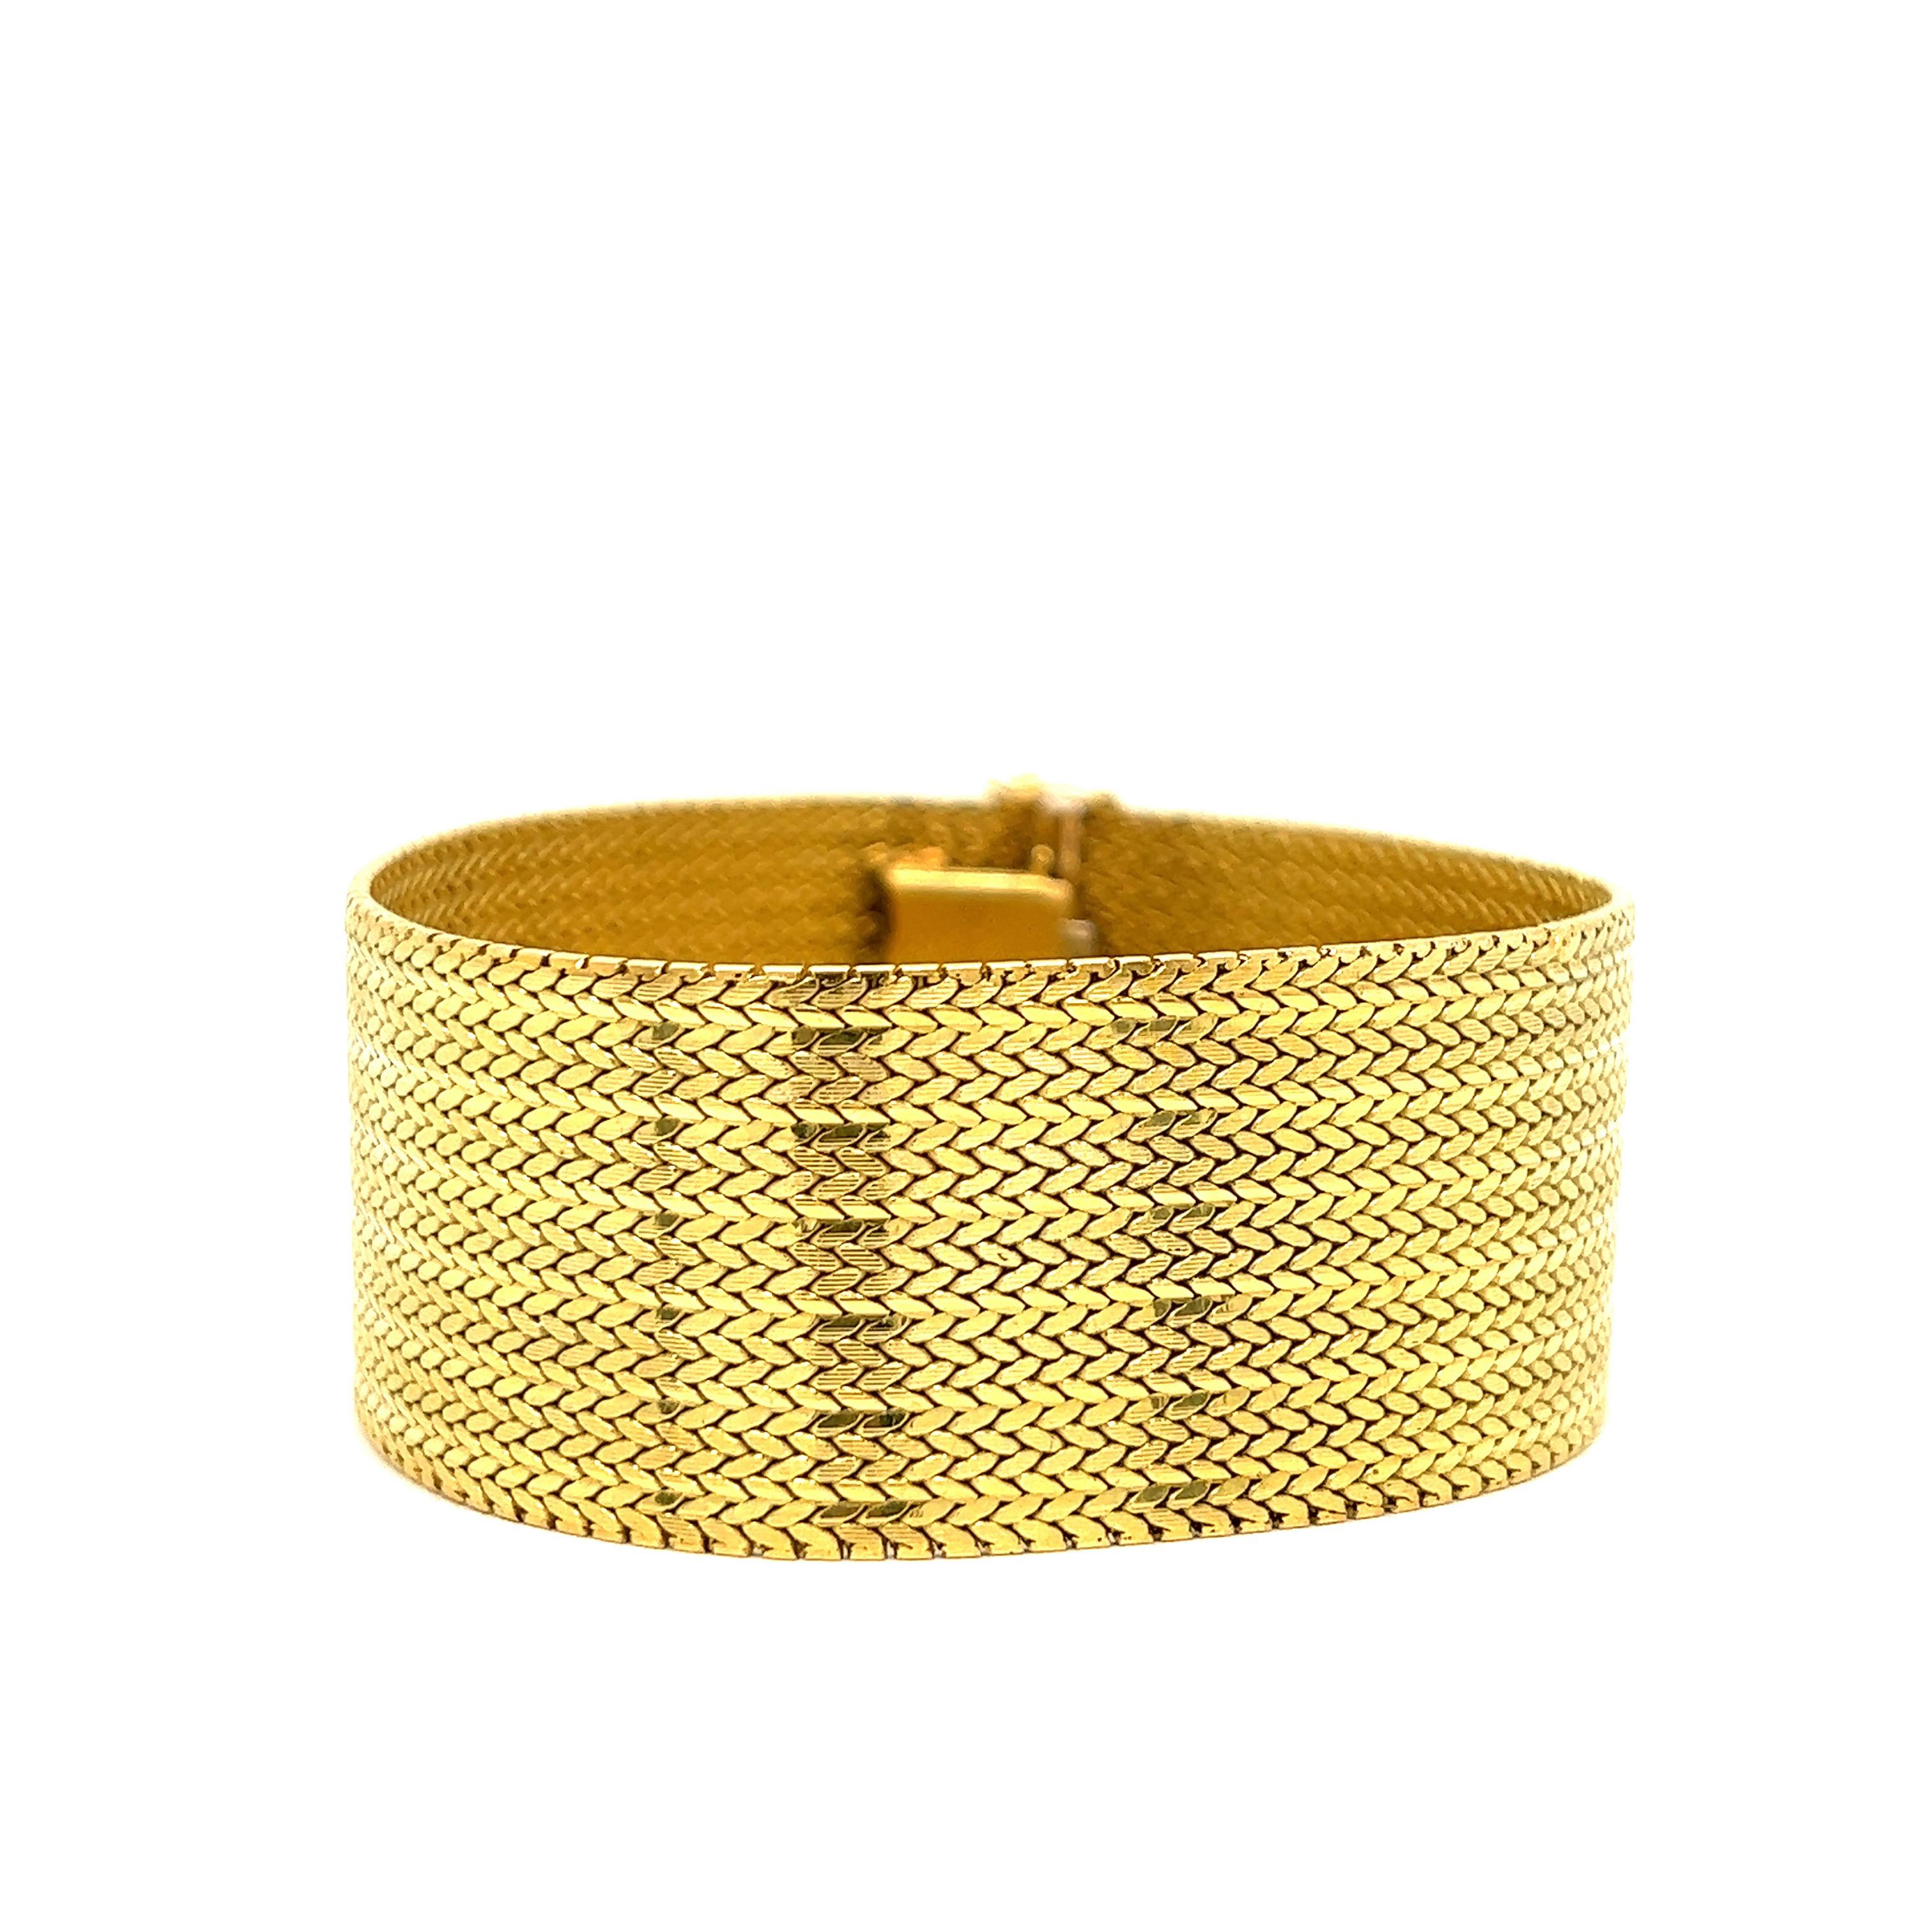 Yellow gold band braided bracelet 

18 karat yellow gold, braided motif; marked 750

Size: width 0.94 inch, length 7.5 inches
Total weight: 71.4 grams